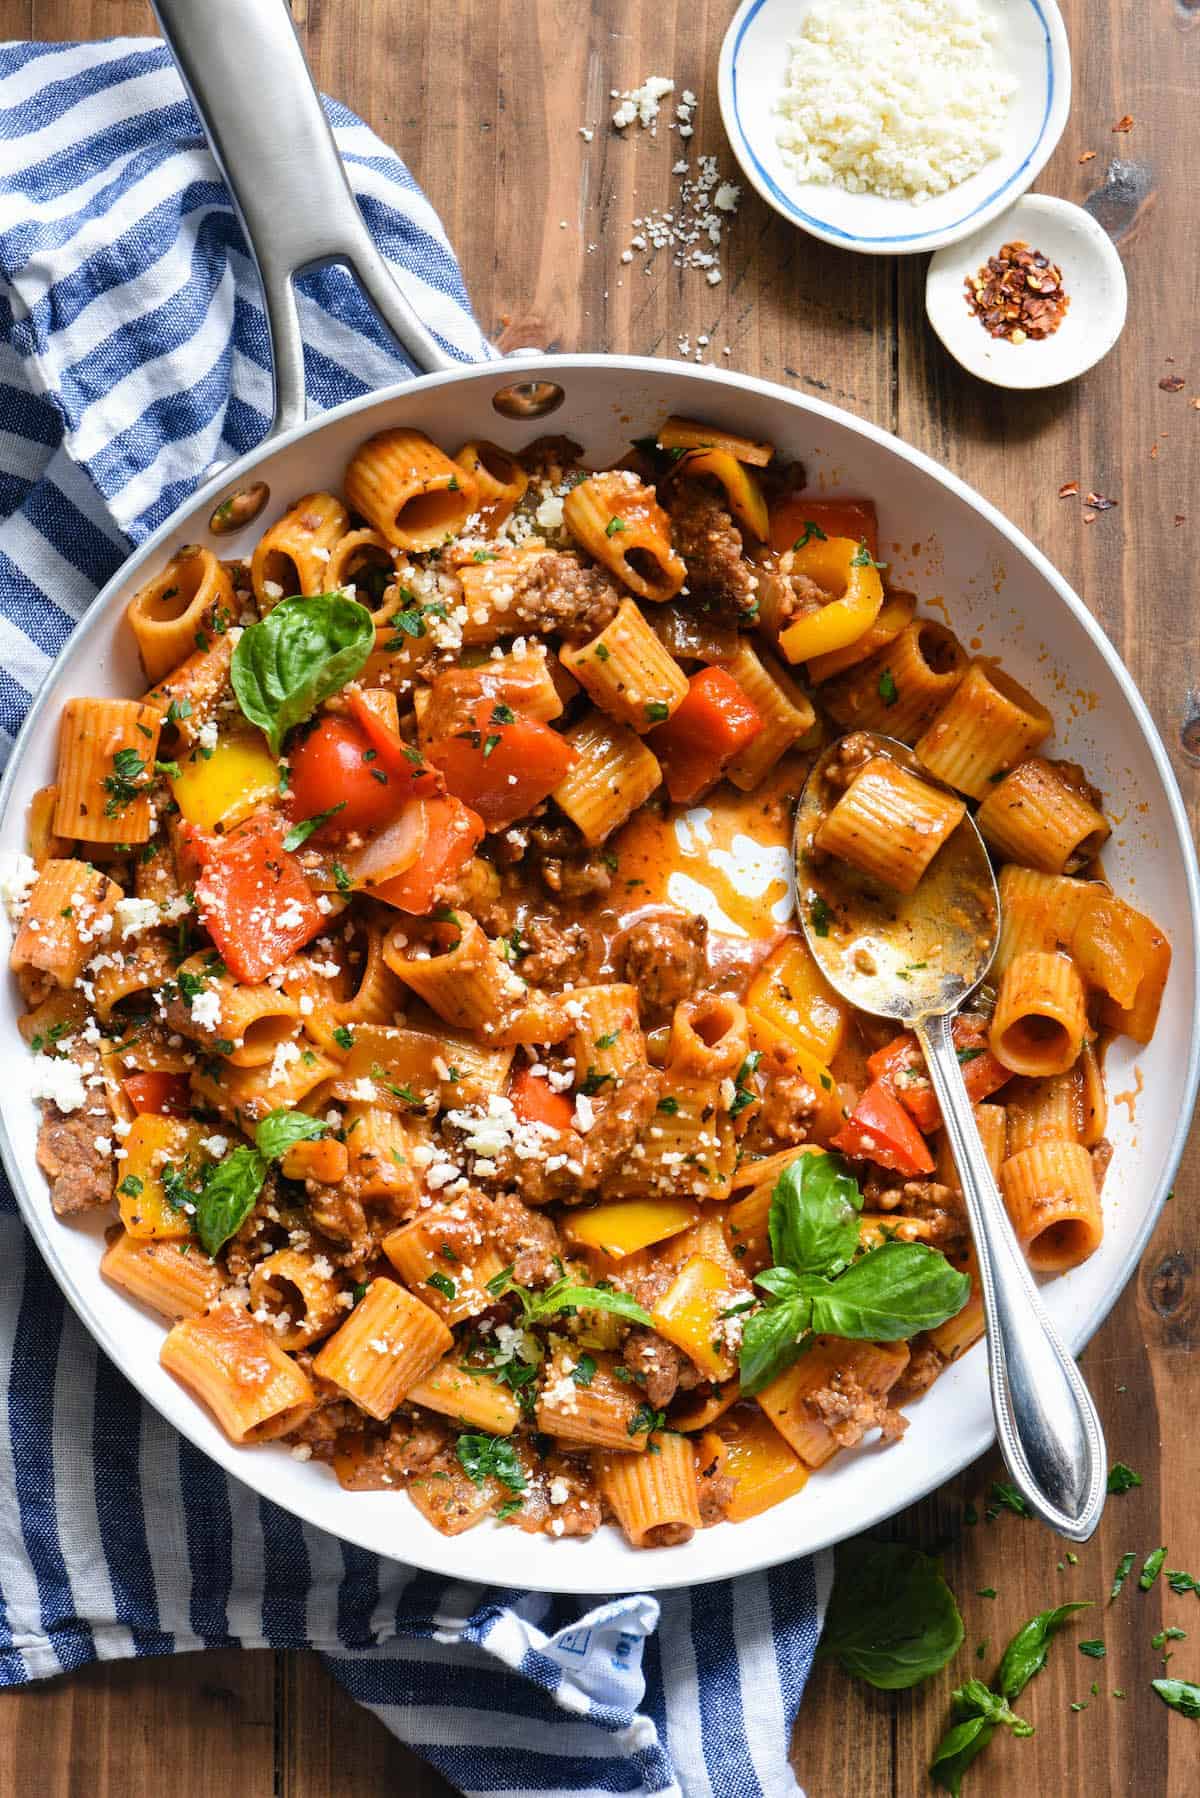 Ground sausage pasta with vegetables in a skillet on a wooden table.